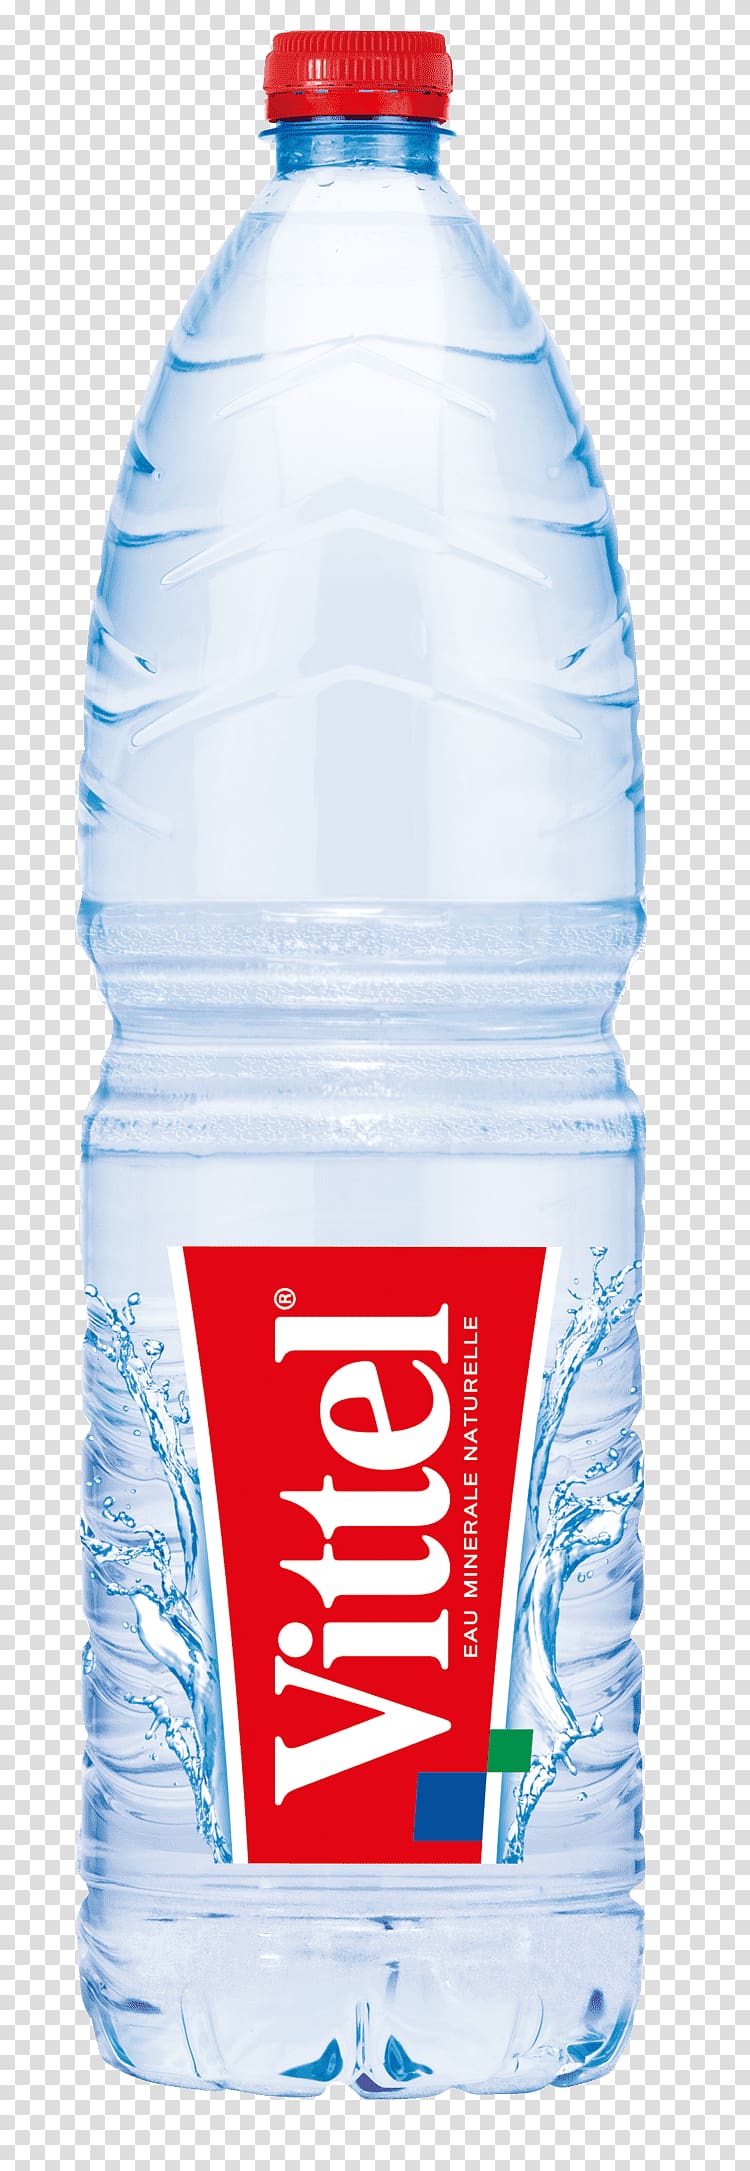 Carbonated water Vittel Bottled water Nestlé Waters, bottle transparent background PNG clipart